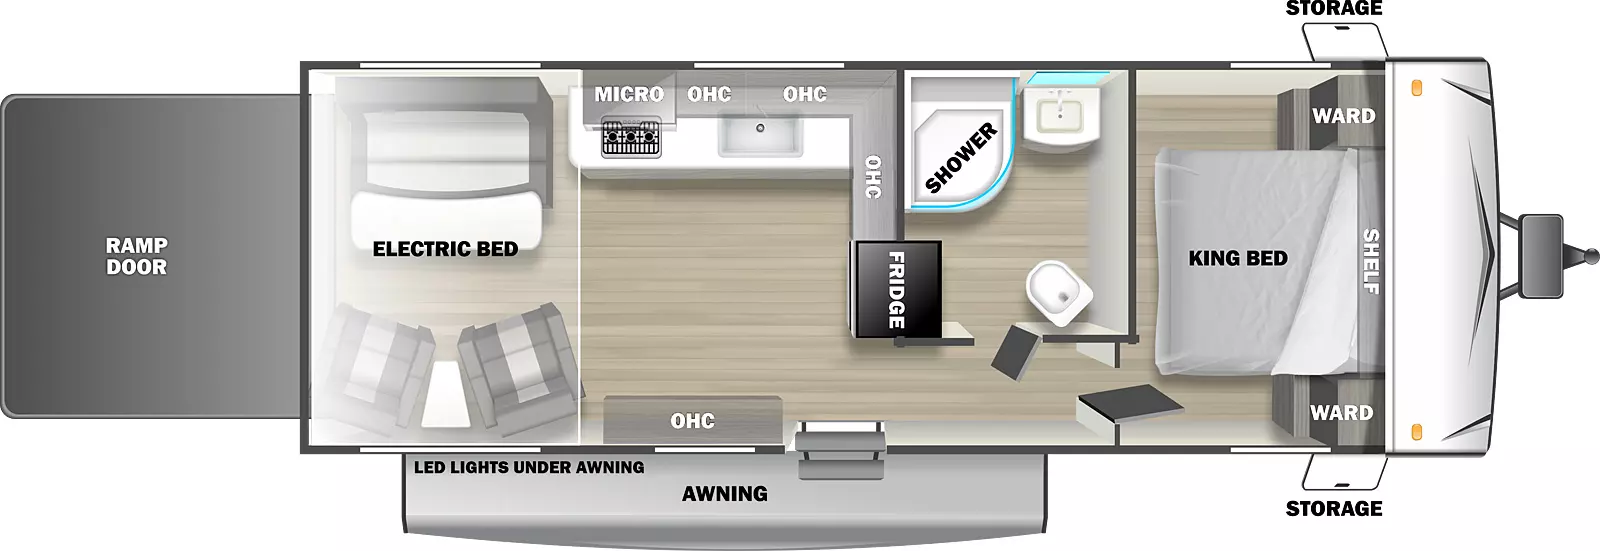 The 24FSGLE has one zero slideouts and one entry. Exterior features a rear ramp door, an awning with LED Lights under, and front pass thru storage. Interior layout front to back: King bed with shelf above and wardrobes on each side; off-door side full bathroom; refrigerator and kitchen countertop along inner wall that wraps to off-door side with overhead cabinet, sink, microwave and cooktop; door side entry and overhead cabinet; rear seating and table with electric bed above.